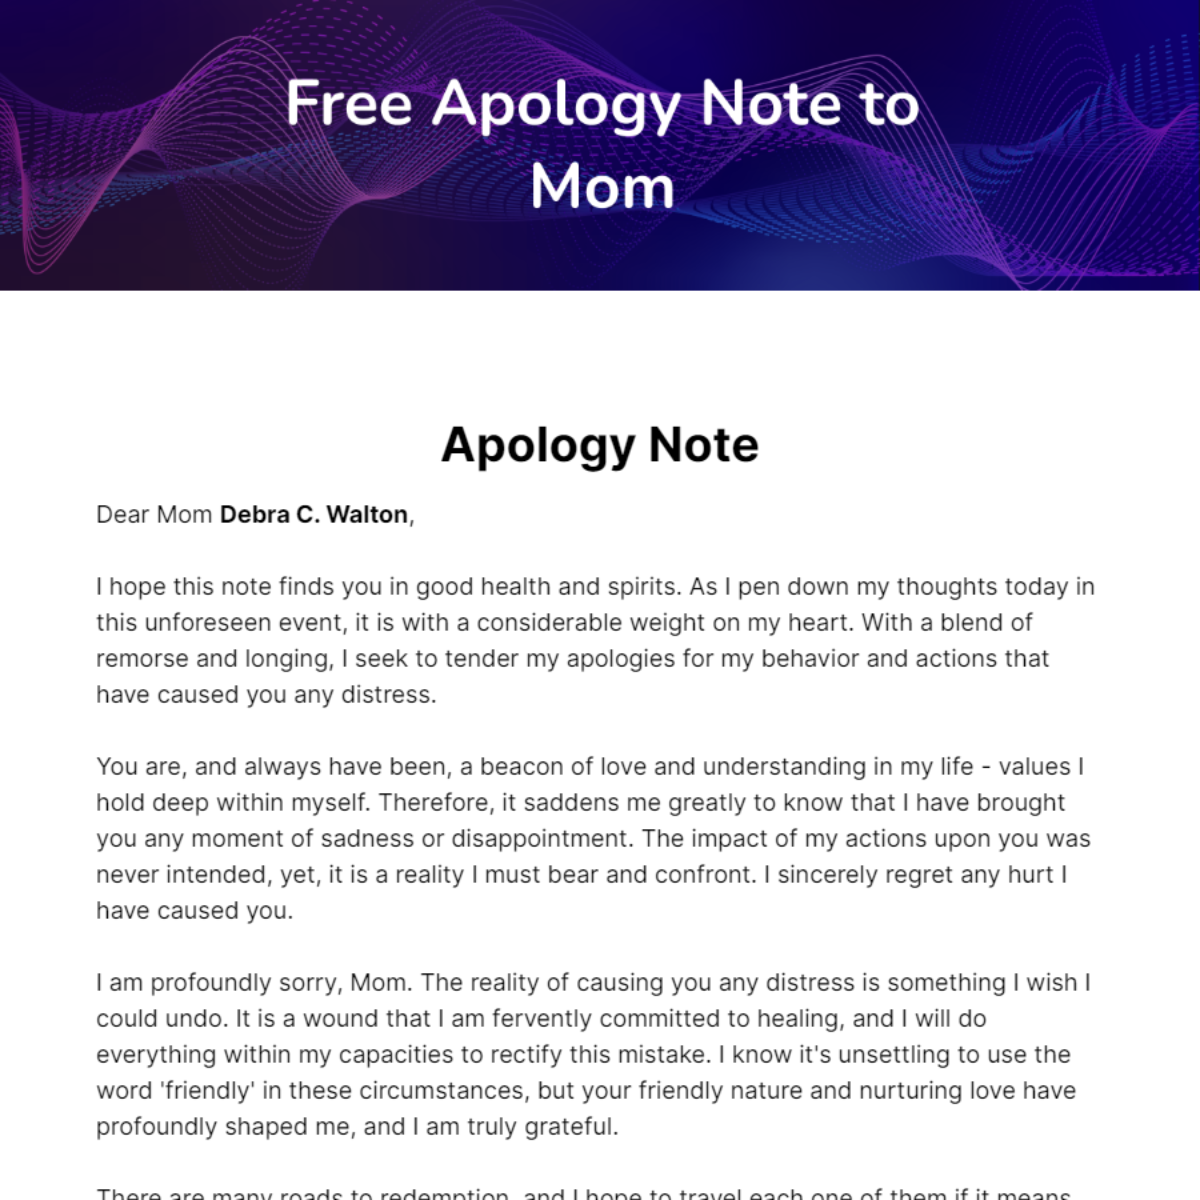 https://images.template.net/281400/Apology-Note-to-Mom-edit-online.jpg